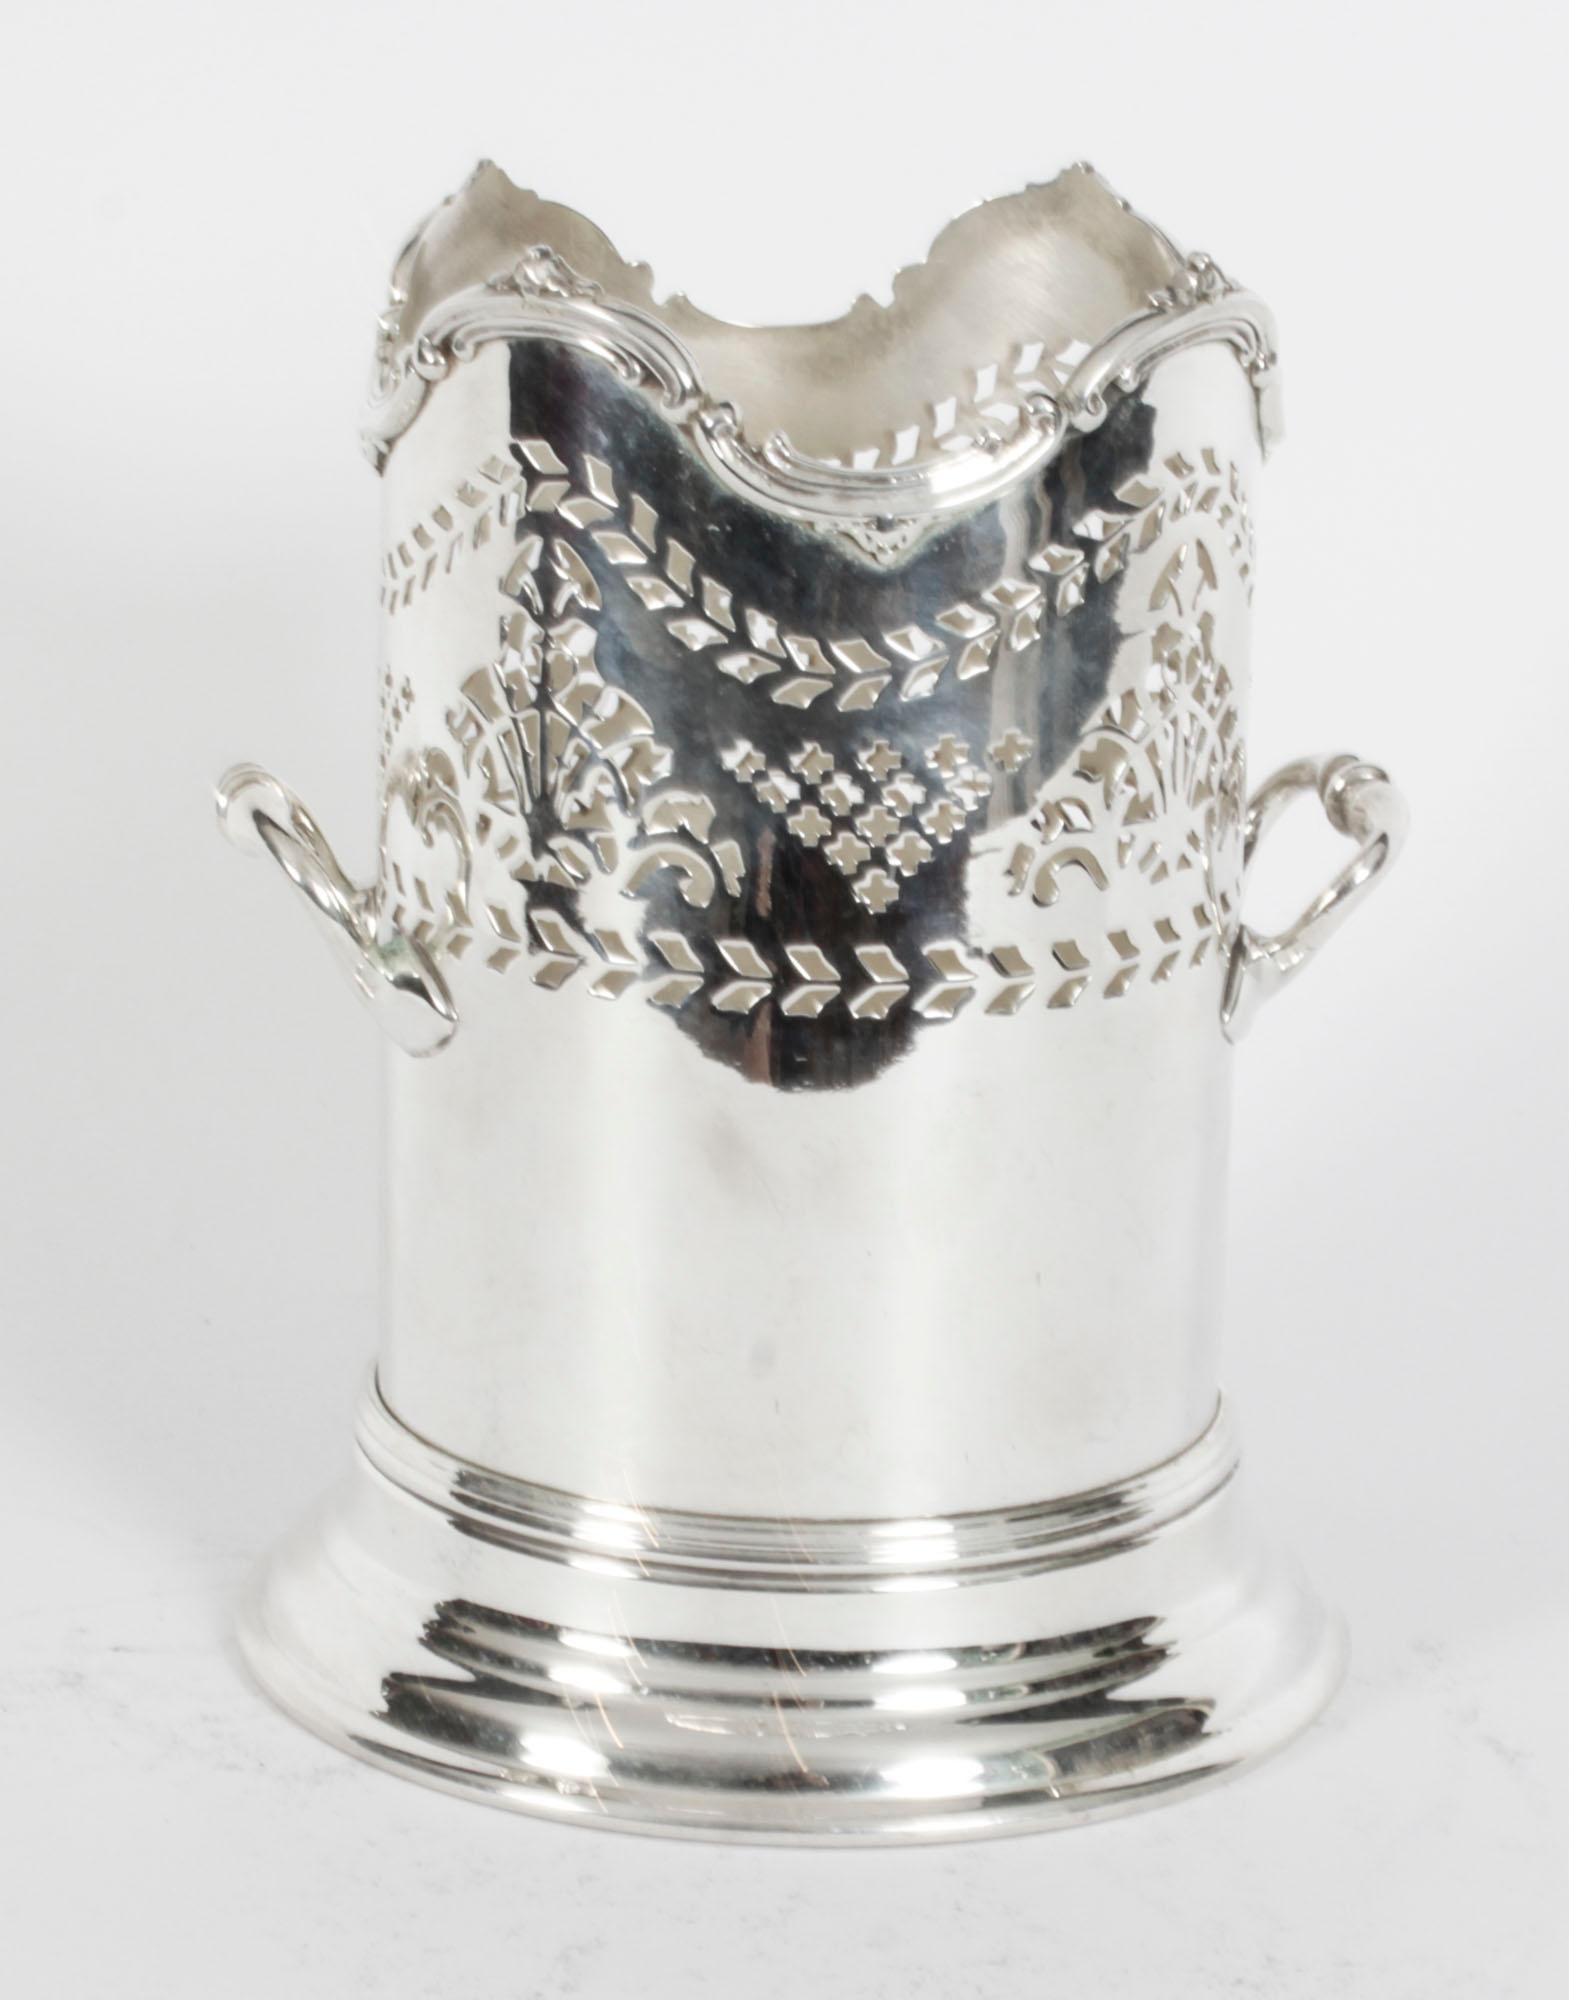 Late 19th Century Antique Edwardian Silver Plated Bottle Holder Henry Wilkinson, 19th Century